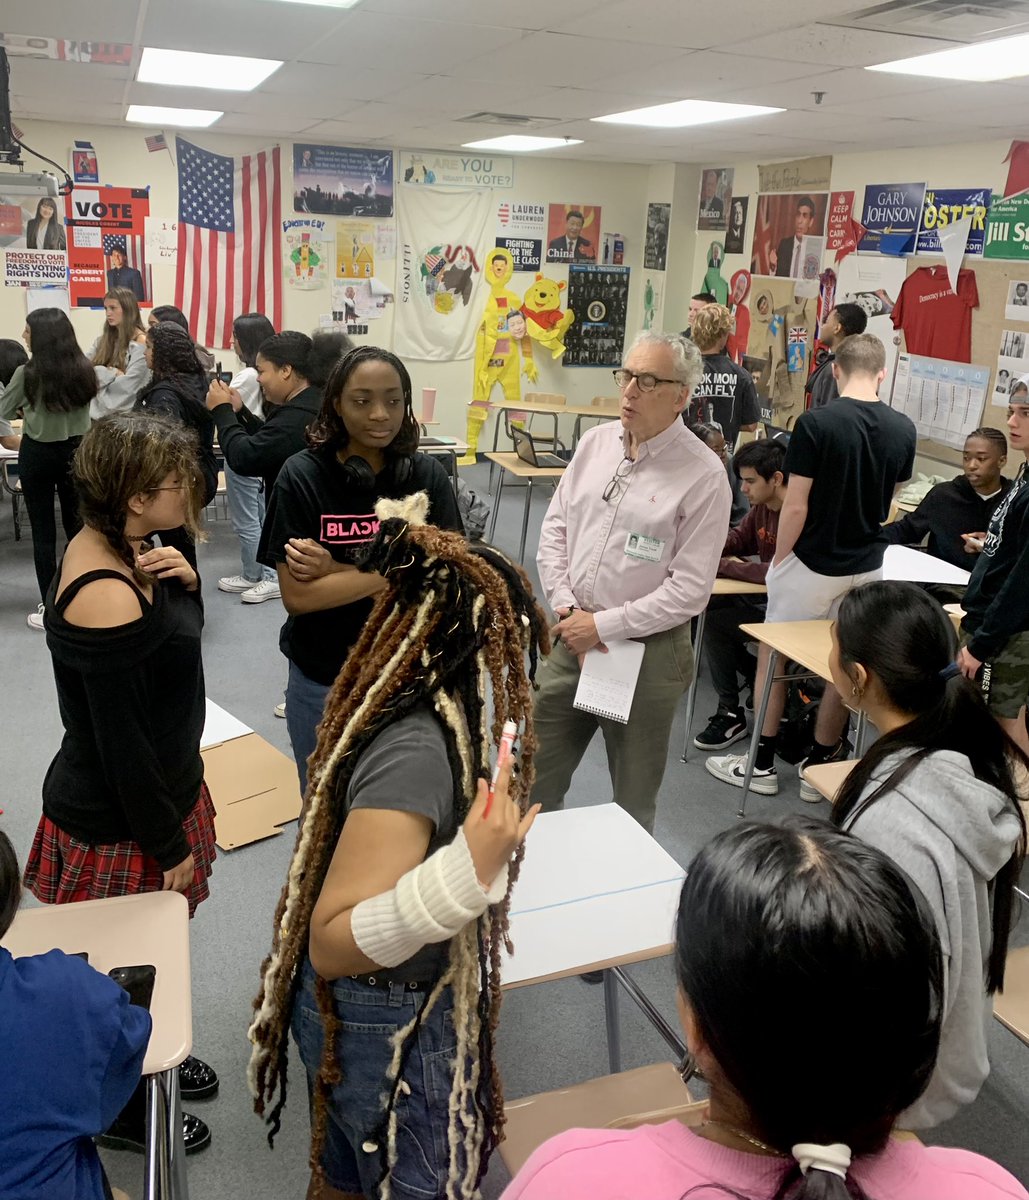 @IL_CivicsHub @msciviclearning @WaubonsieValley 

Welcomed @nytimes journalist and author @jamestraub1 into my #civicsisback classroom today. Jim is writing a book on civics in schools. I look forward to reading if we make the publisher’s cut!
@mrdyche #DemocracySchool #CivXNow